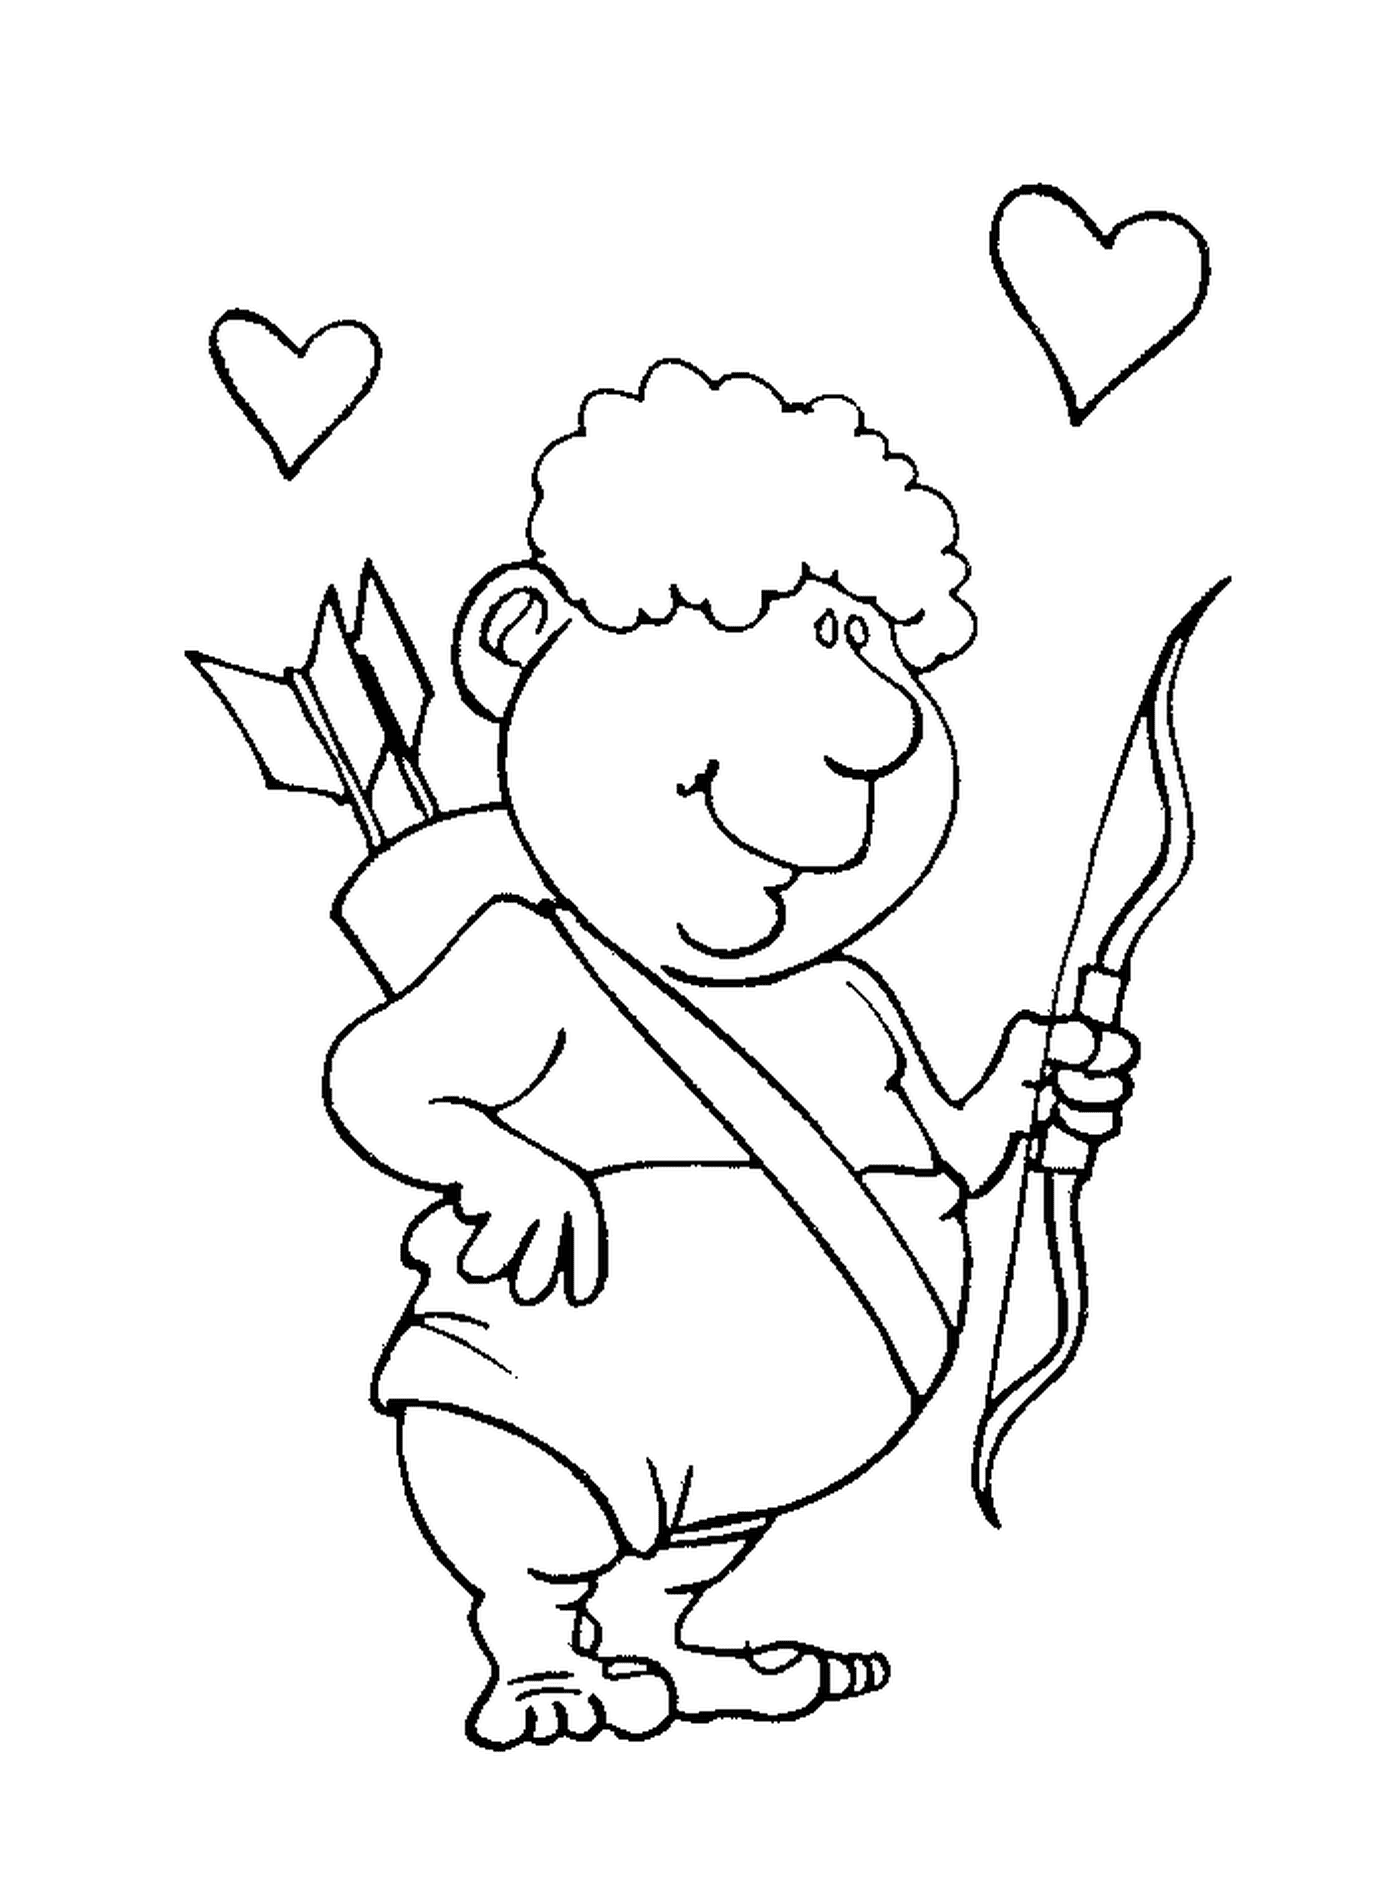  Valentine's Day, Cupid in Action 